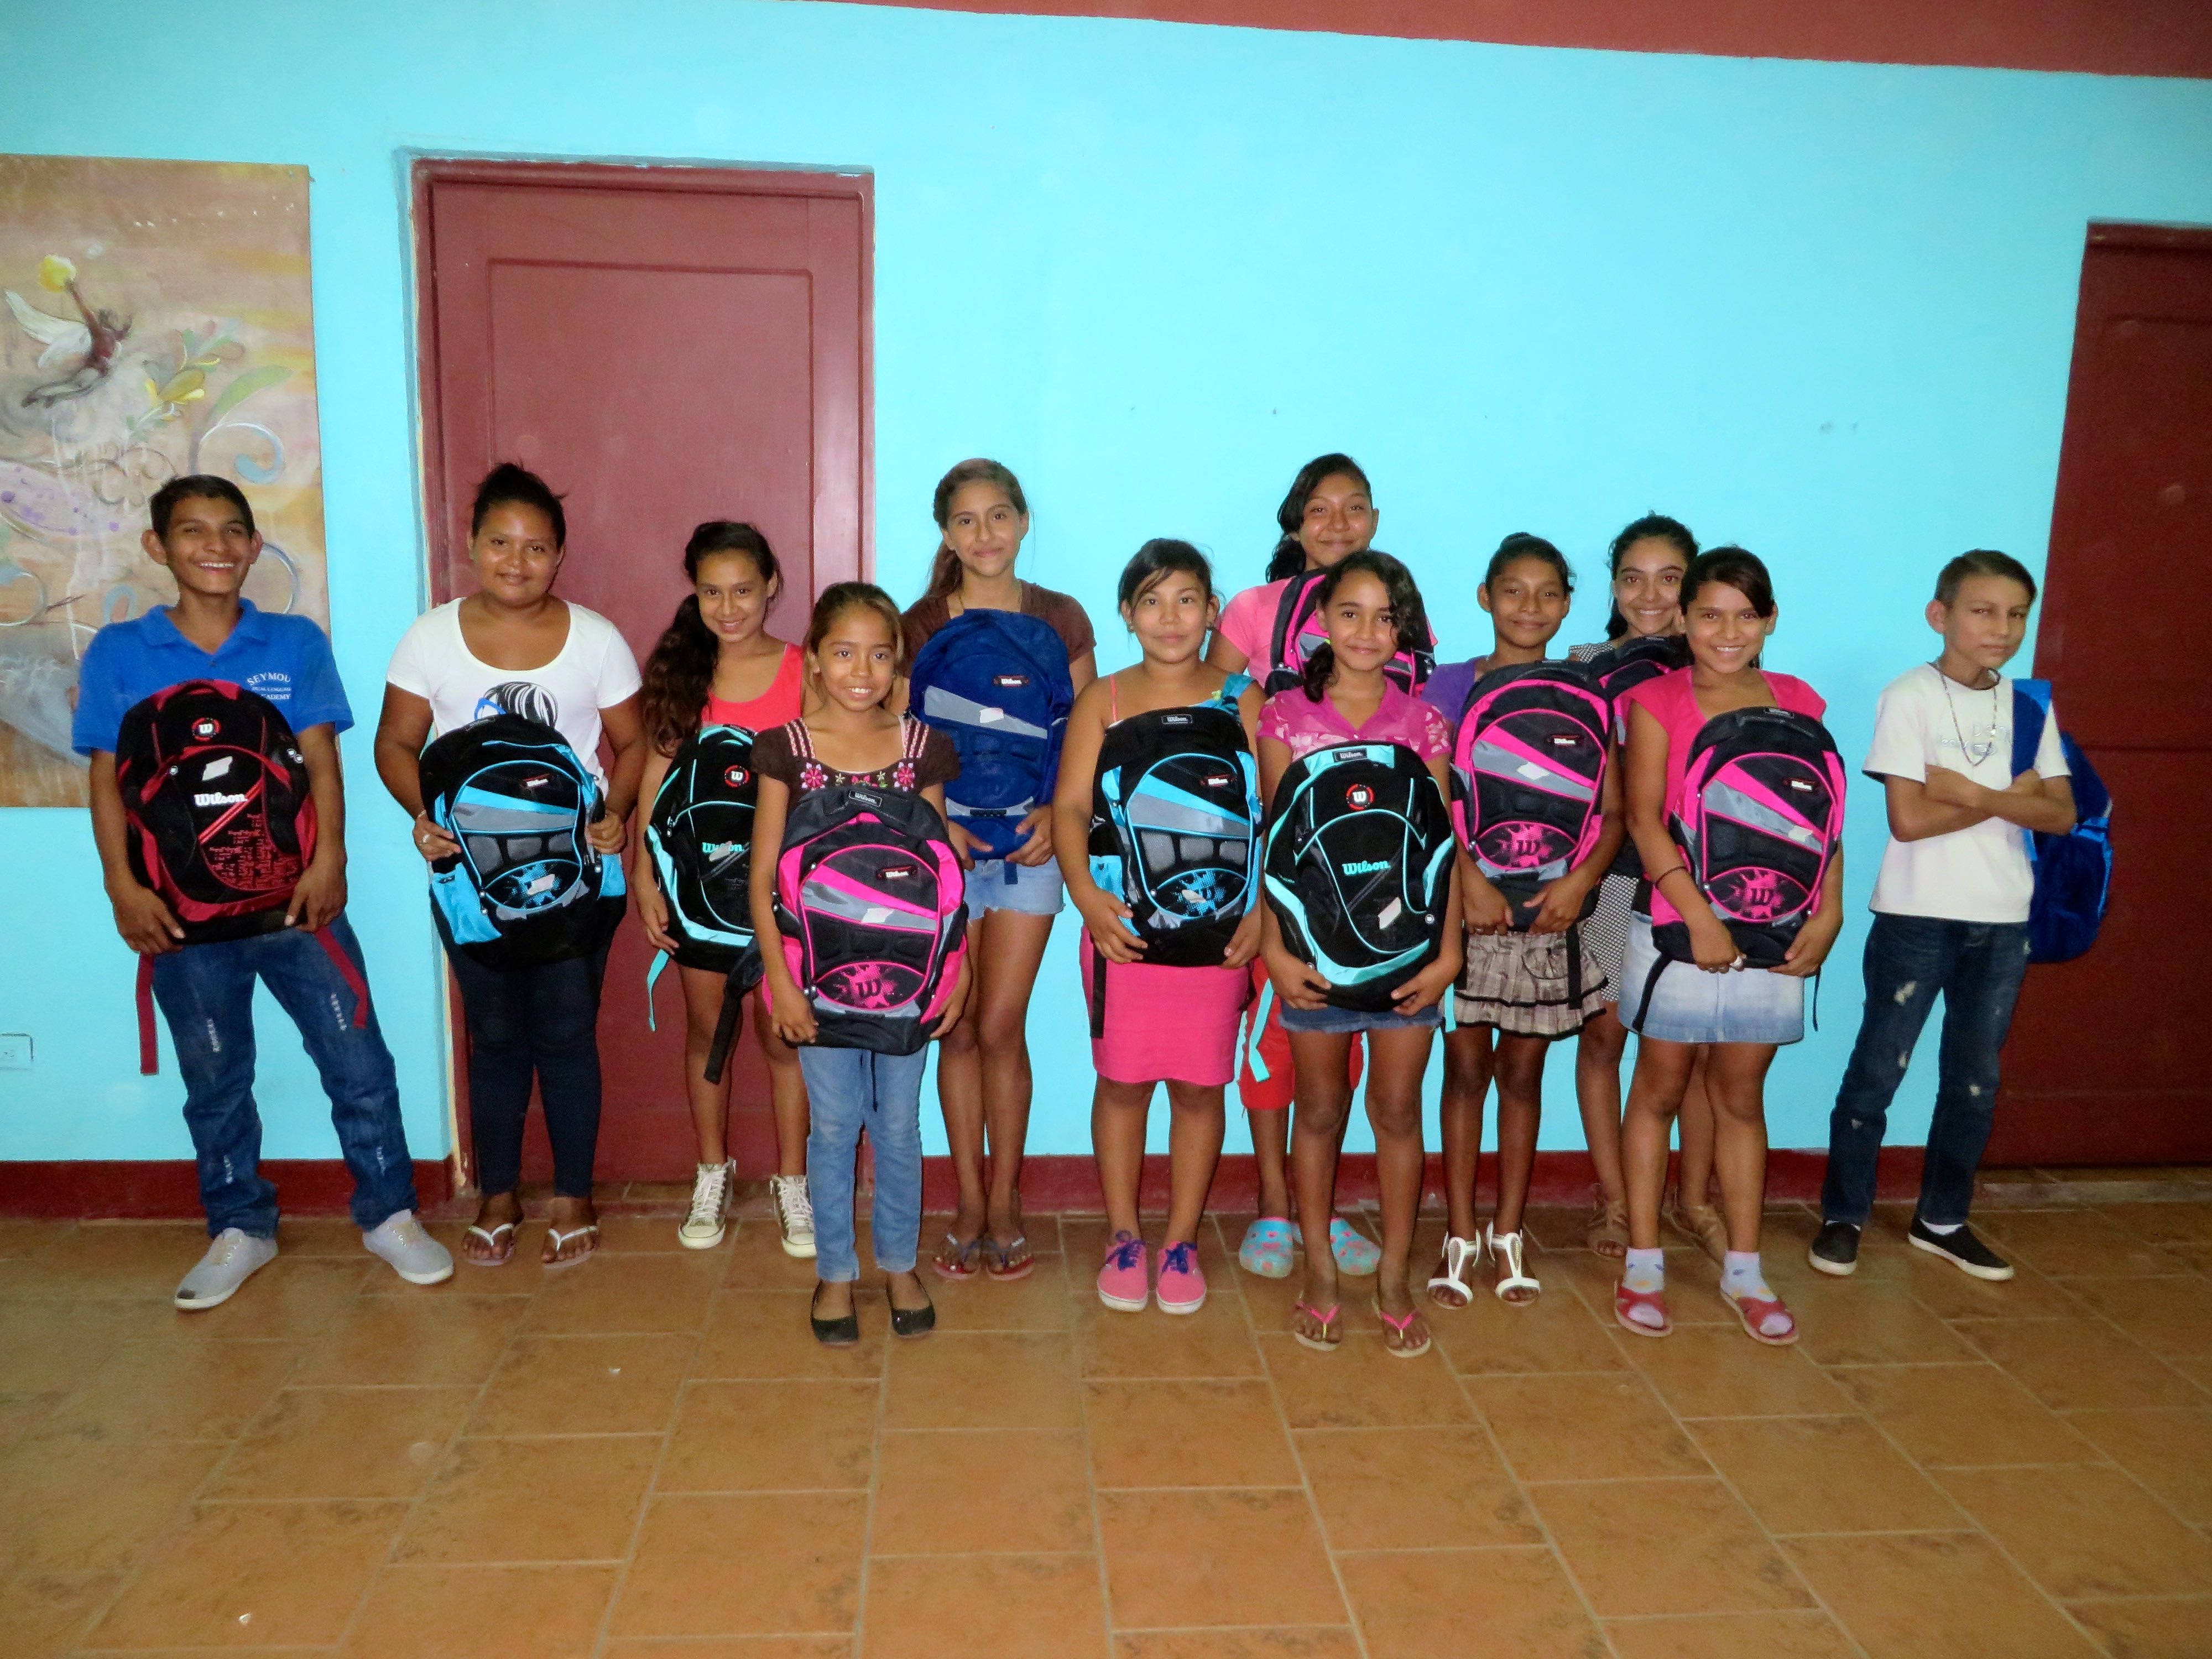 All of these Candelaria students are heading into their first year of high school. 